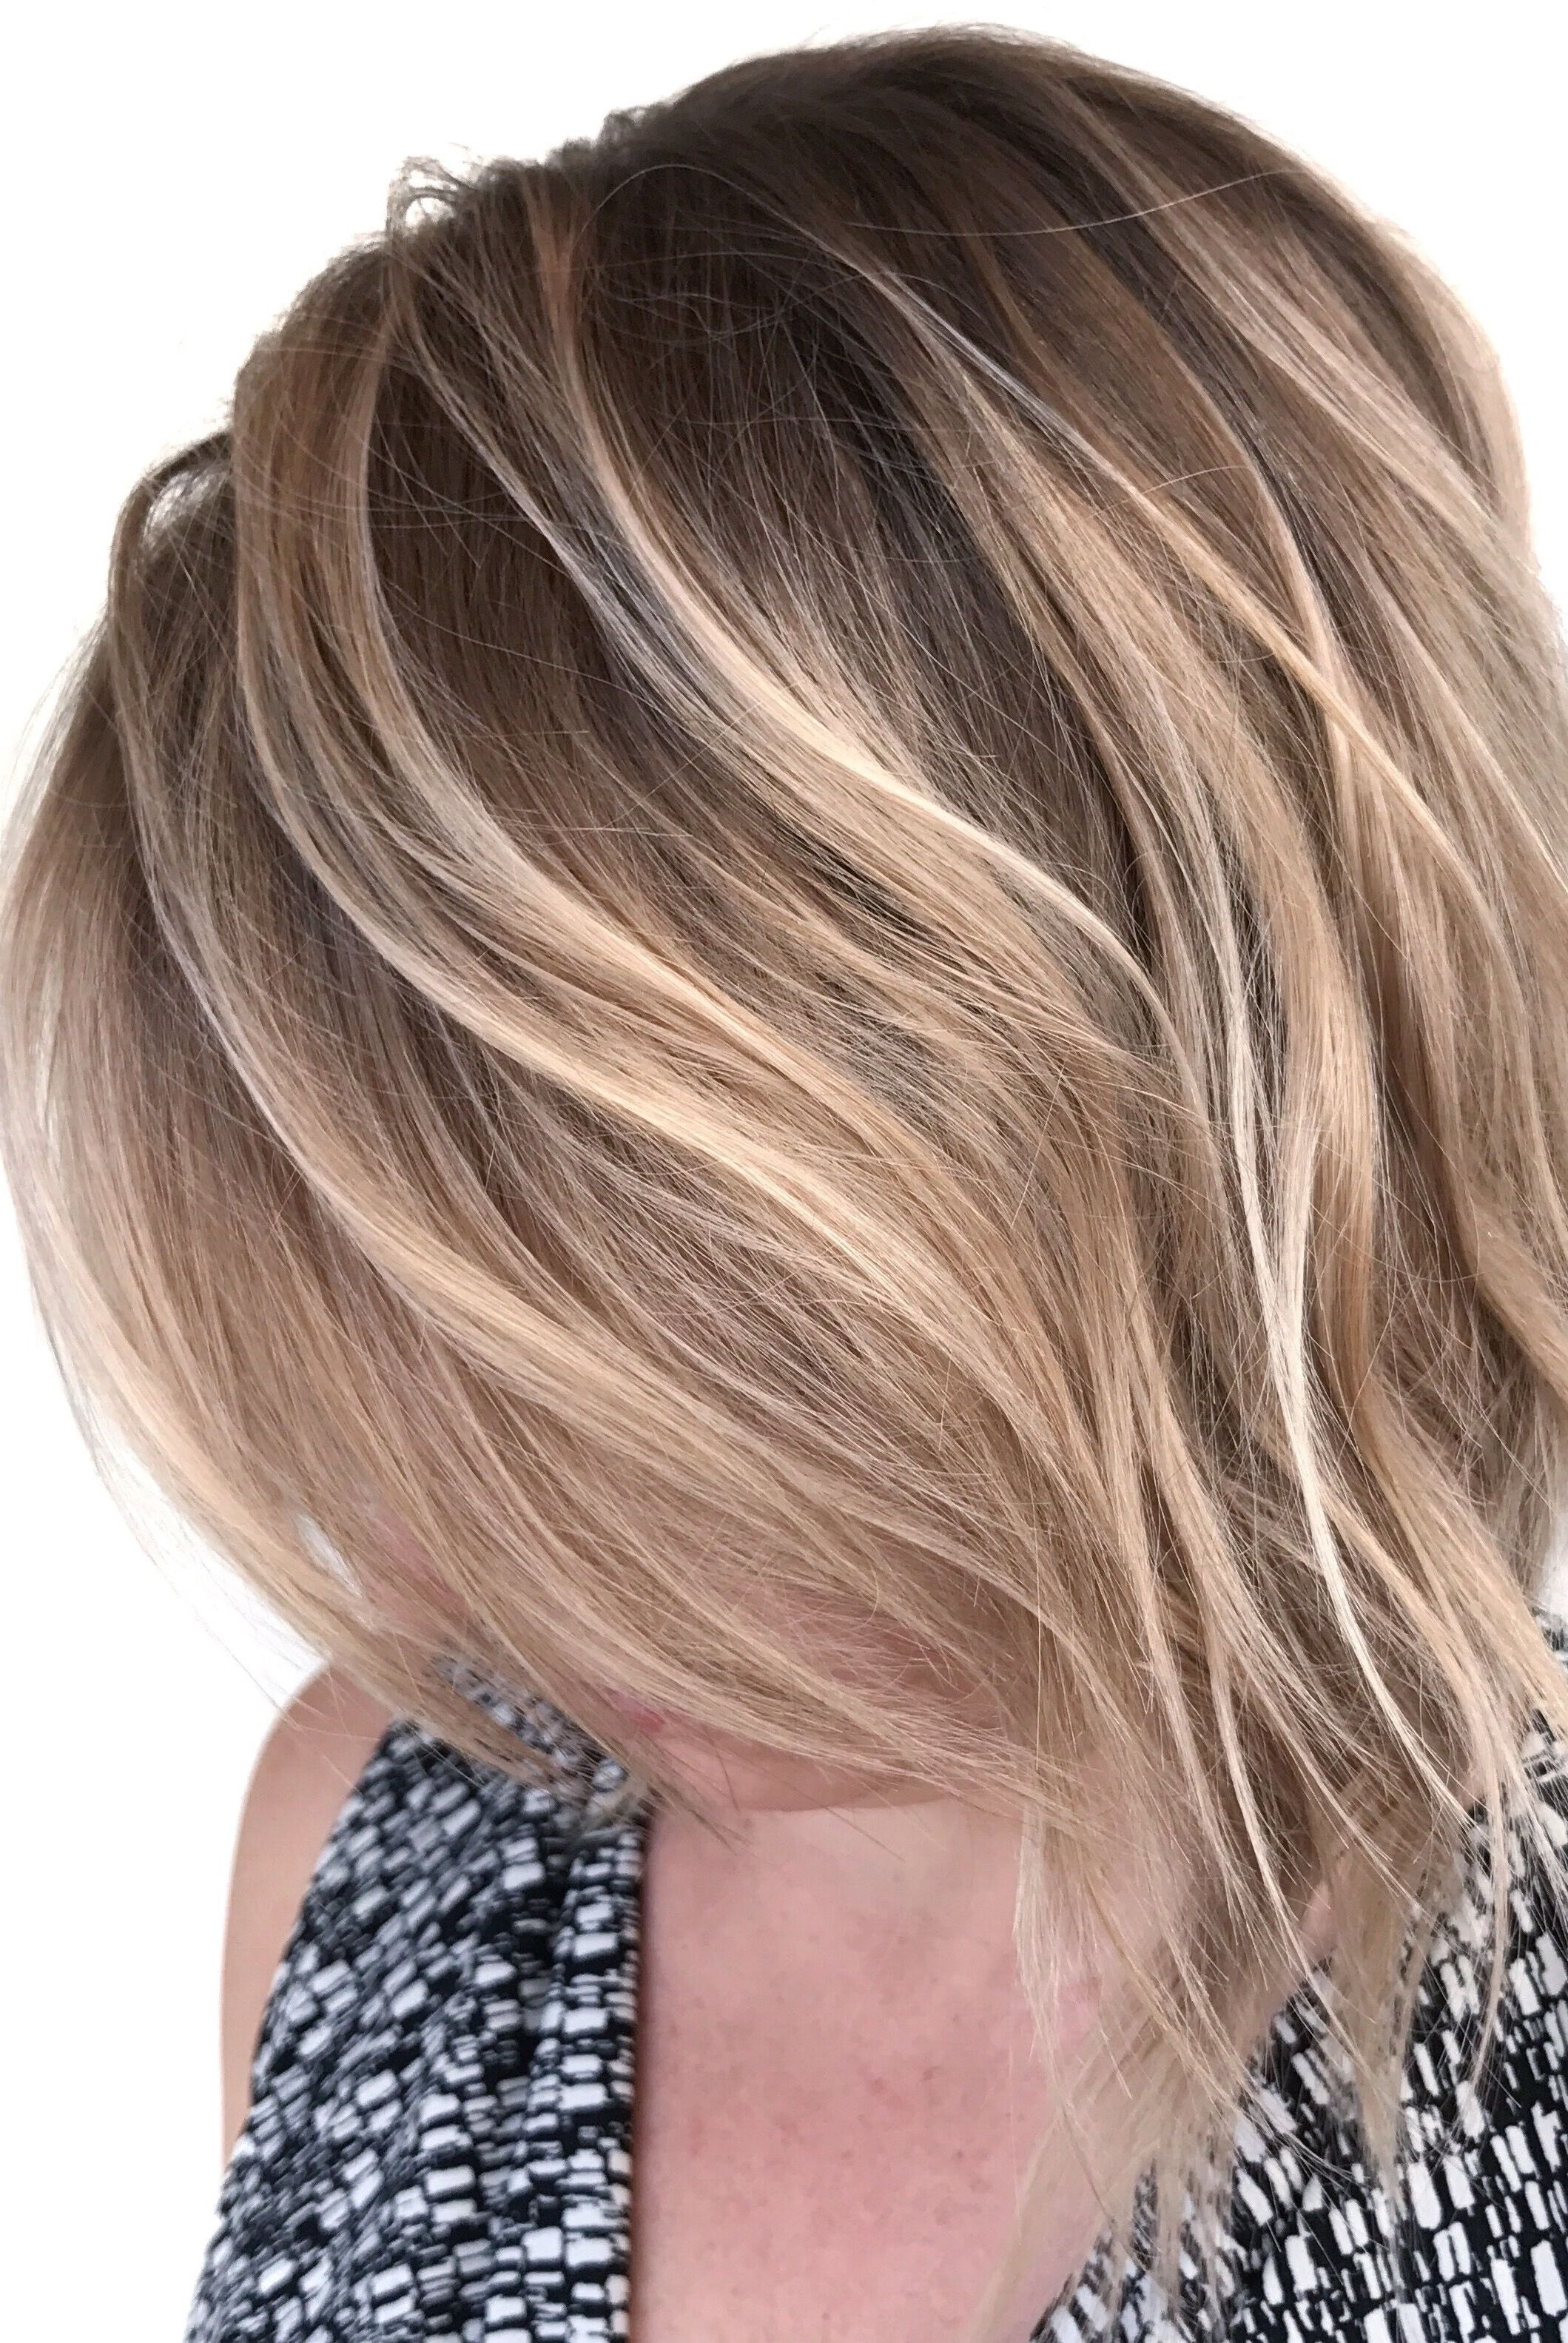 Blonde Balayage ; Natural Blonde Highlights ; Short Hair Balayage Within Fashionable Contrasting Highlights Blonde Hairstyles (View 1 of 20)